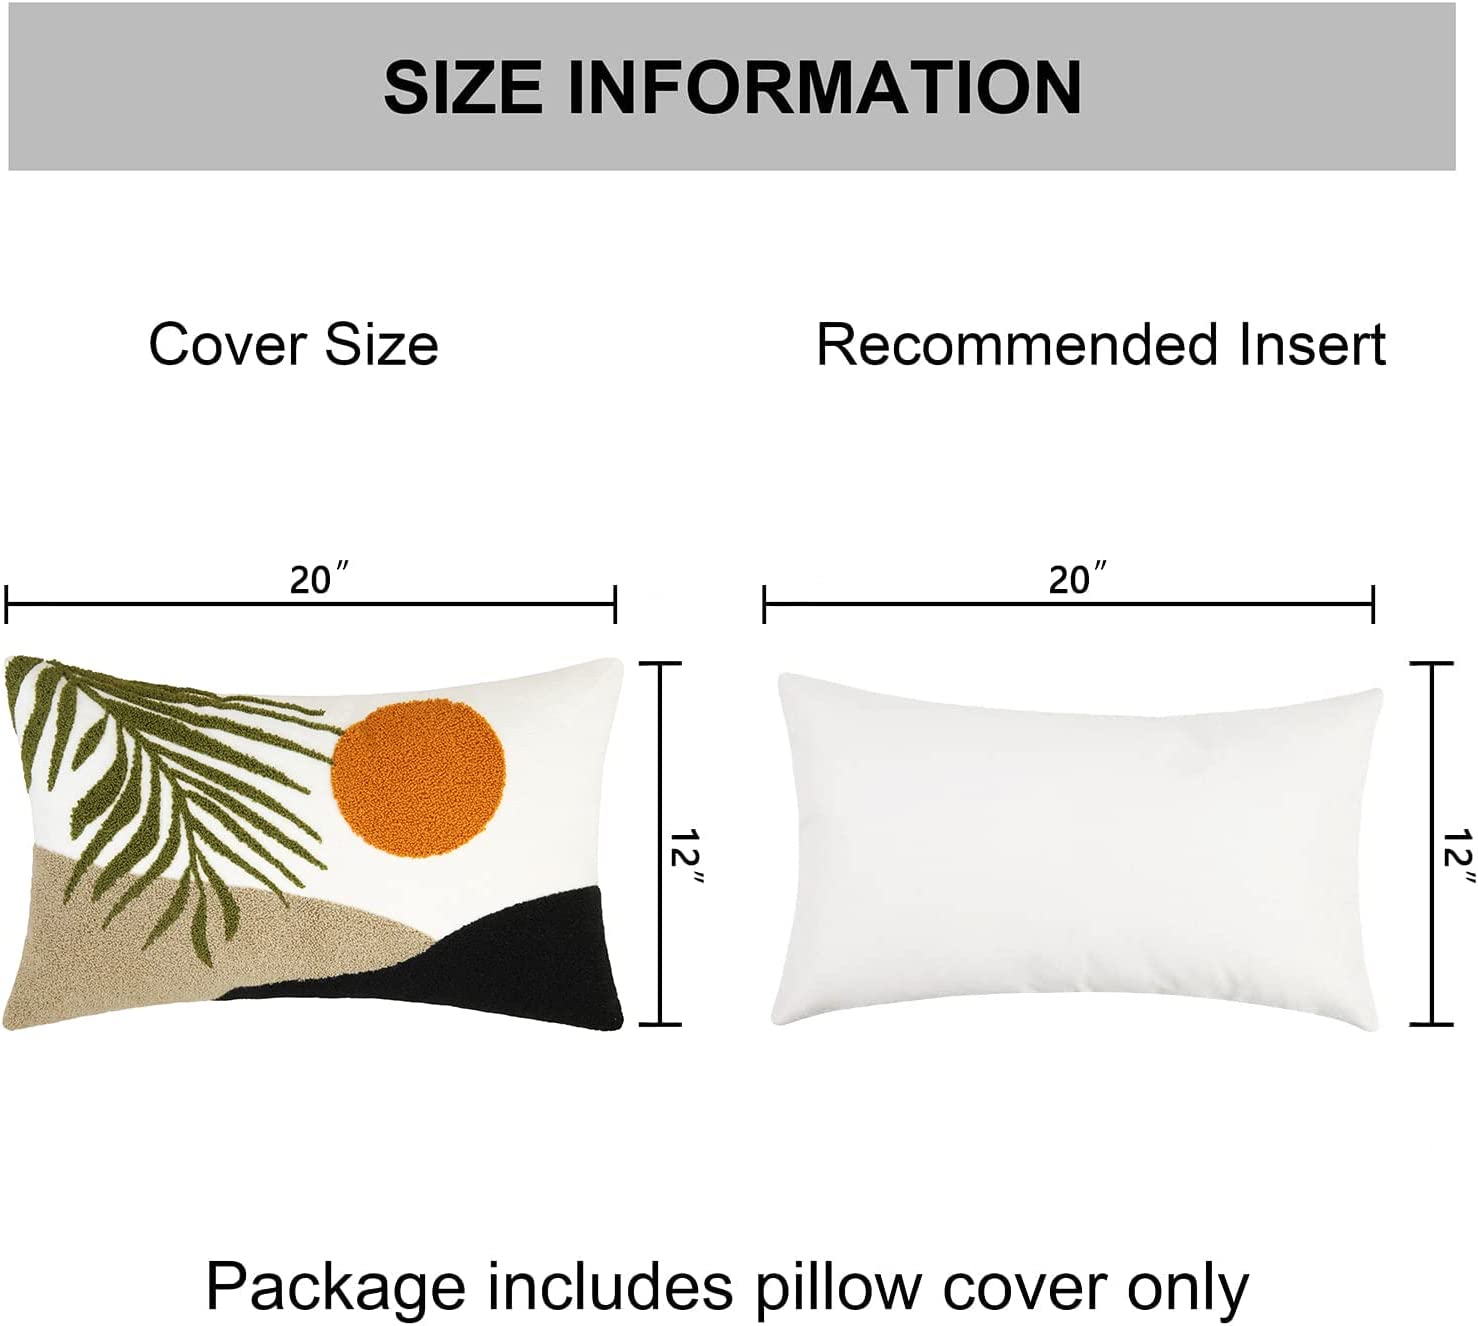 HOW TO SIZE YOUR PILLOW INSERTS – Boho Pillow